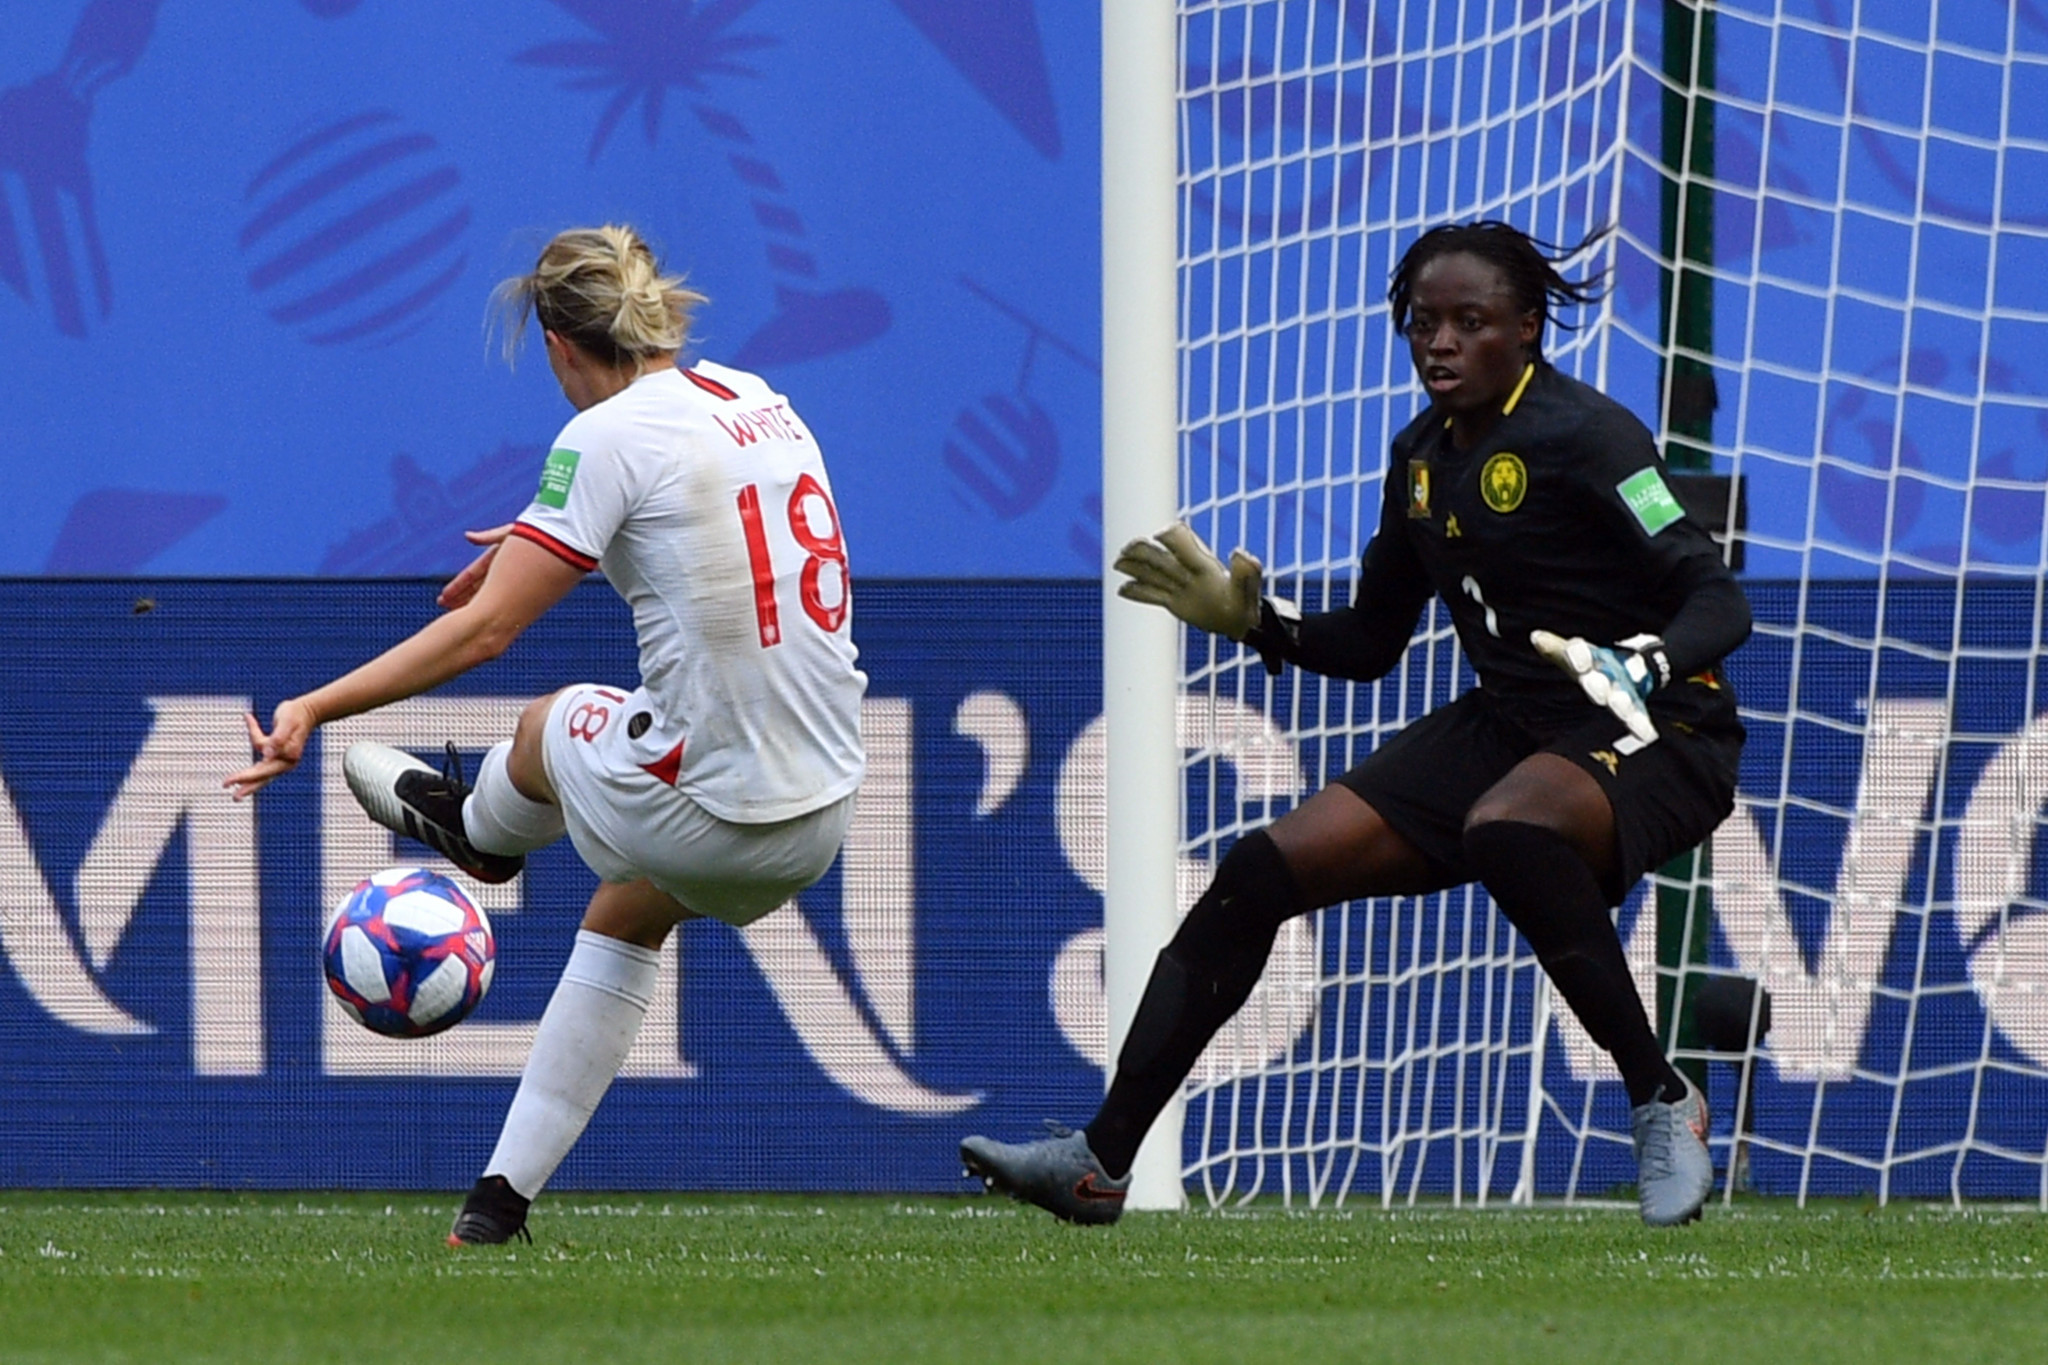 Ellen White put England 2-0 ahead in first half stoppage time in a goal given after VAR overturned an offside call ©Getty Images